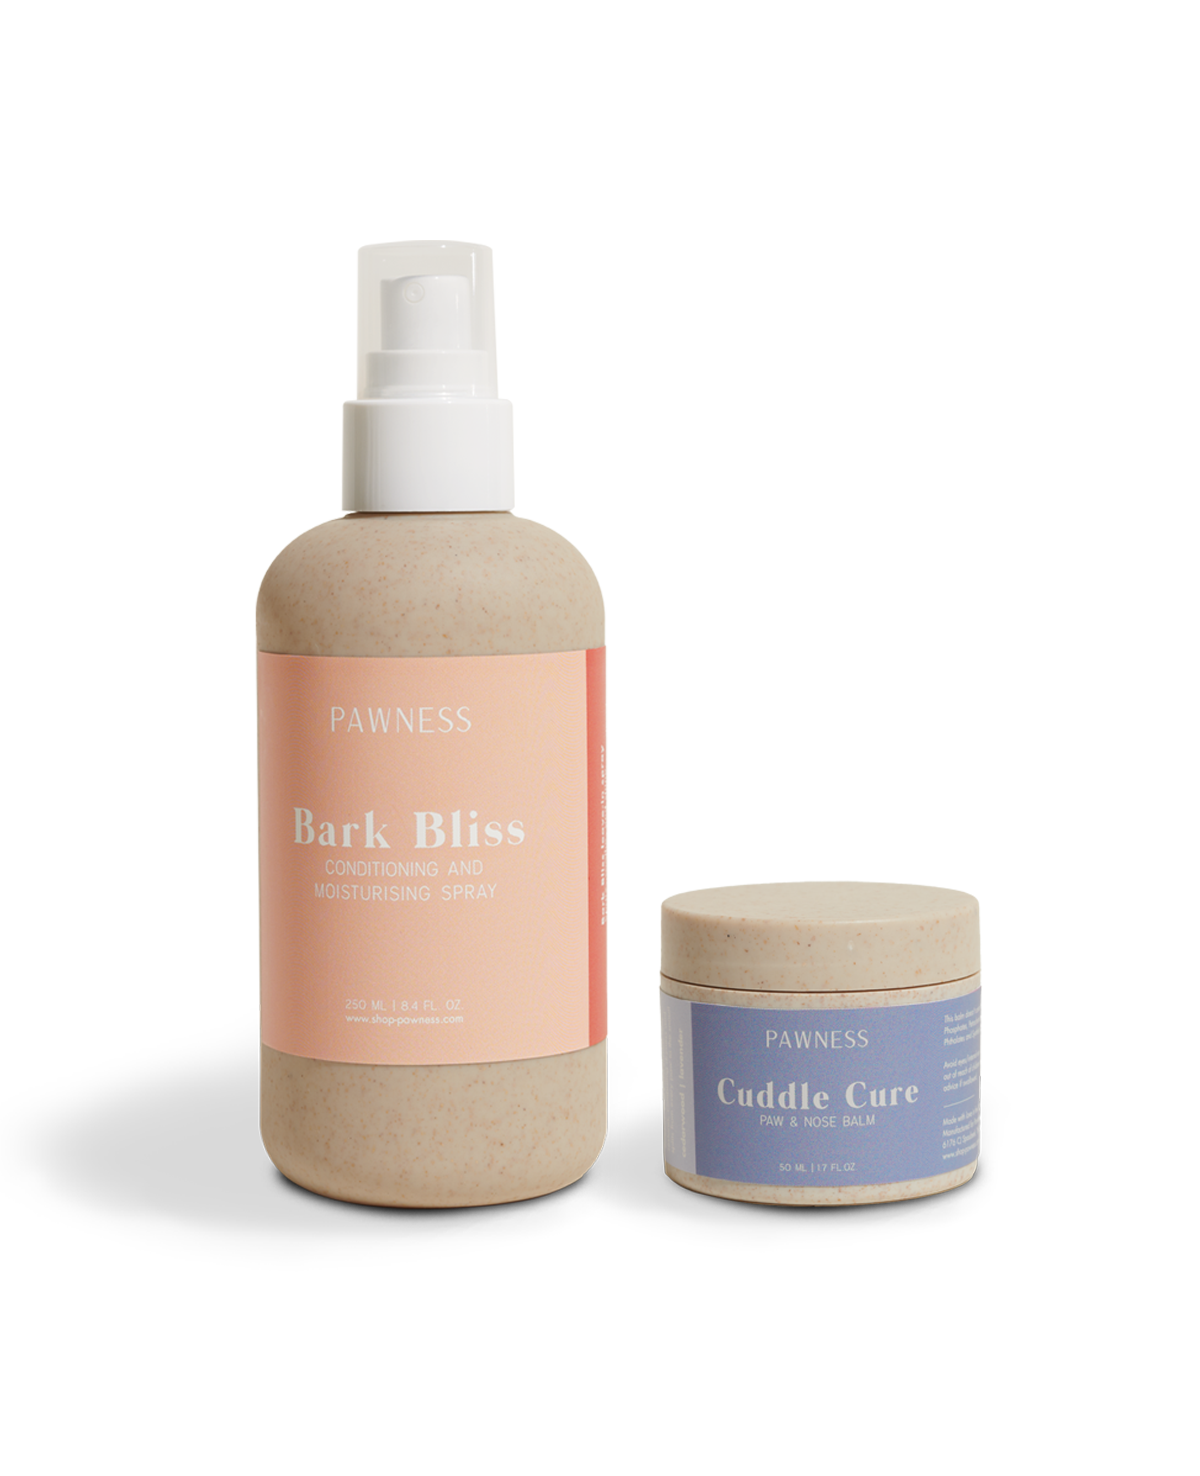 Back Riles body lotion and body wash - a set of skincare products for the body, providing nourishment and hydration.